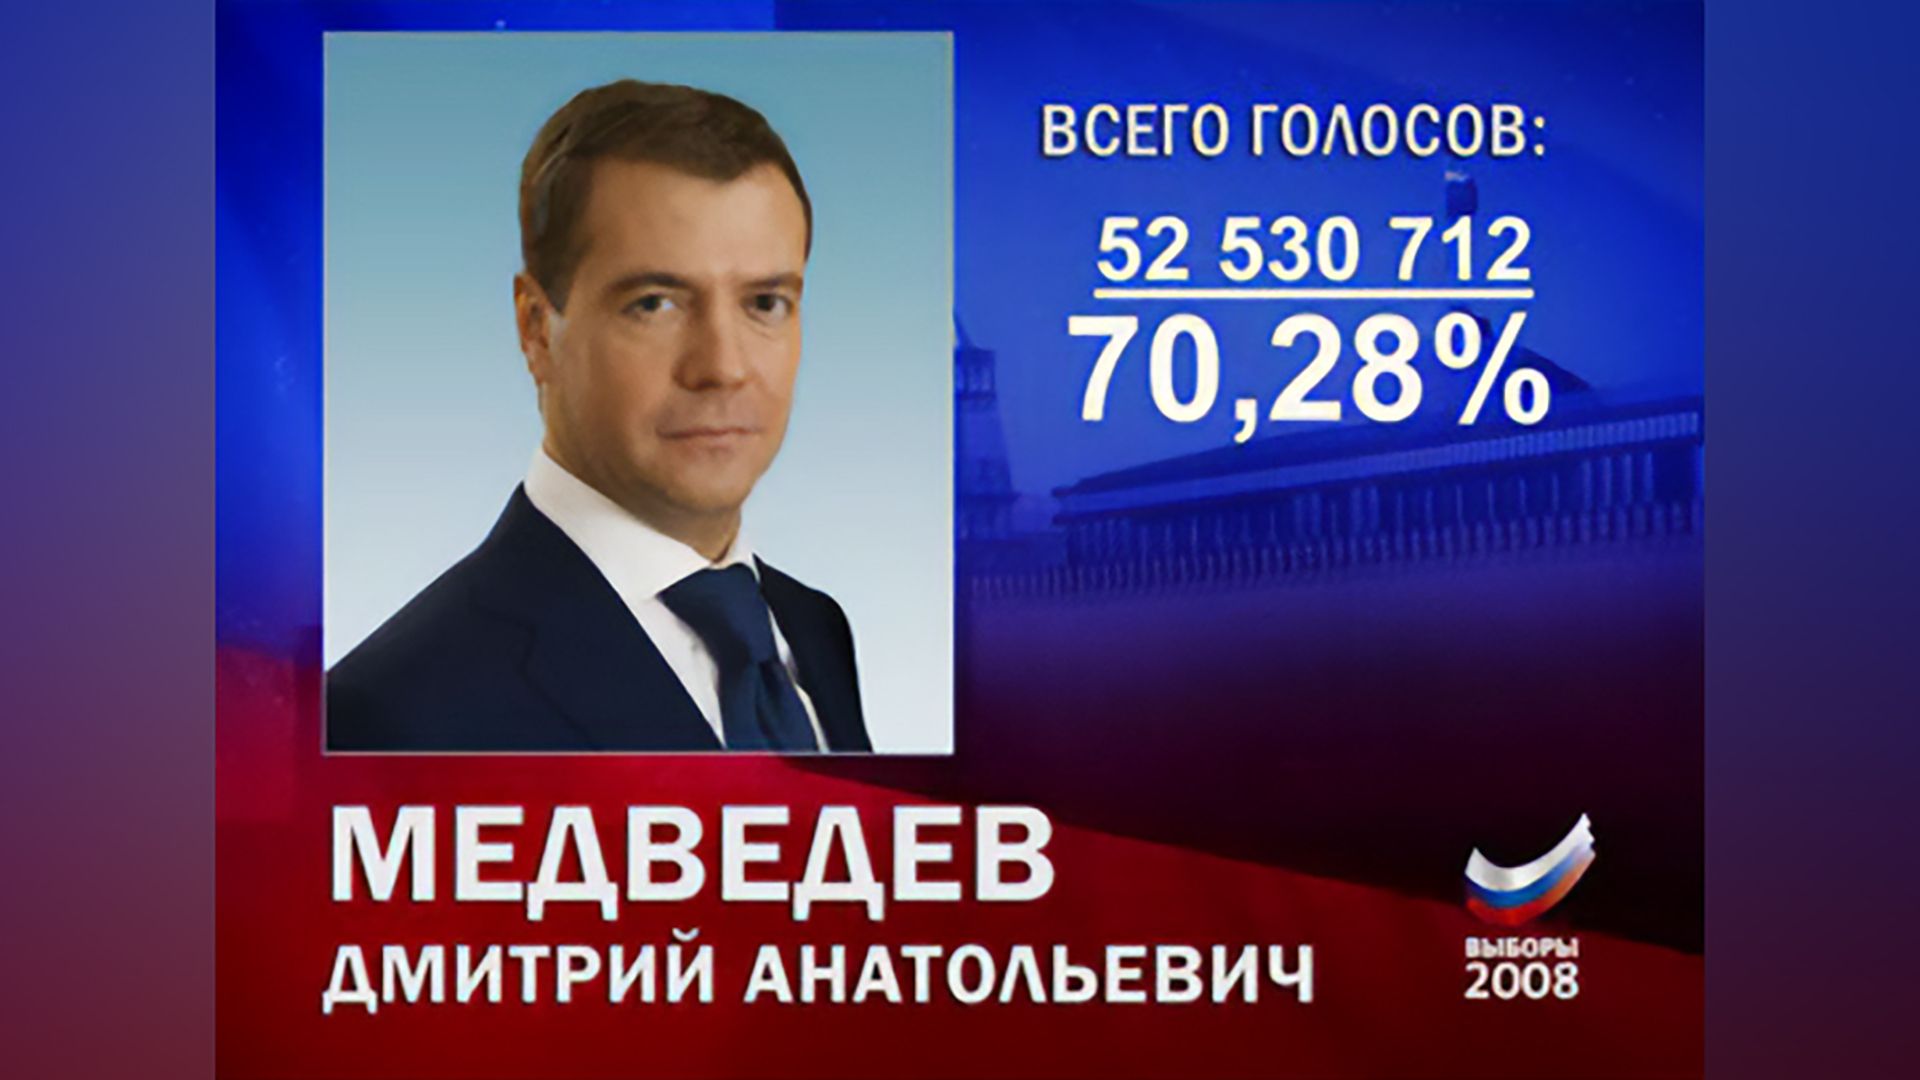 March 2, 2008: Dmitry Medvedev became the third president of Russia